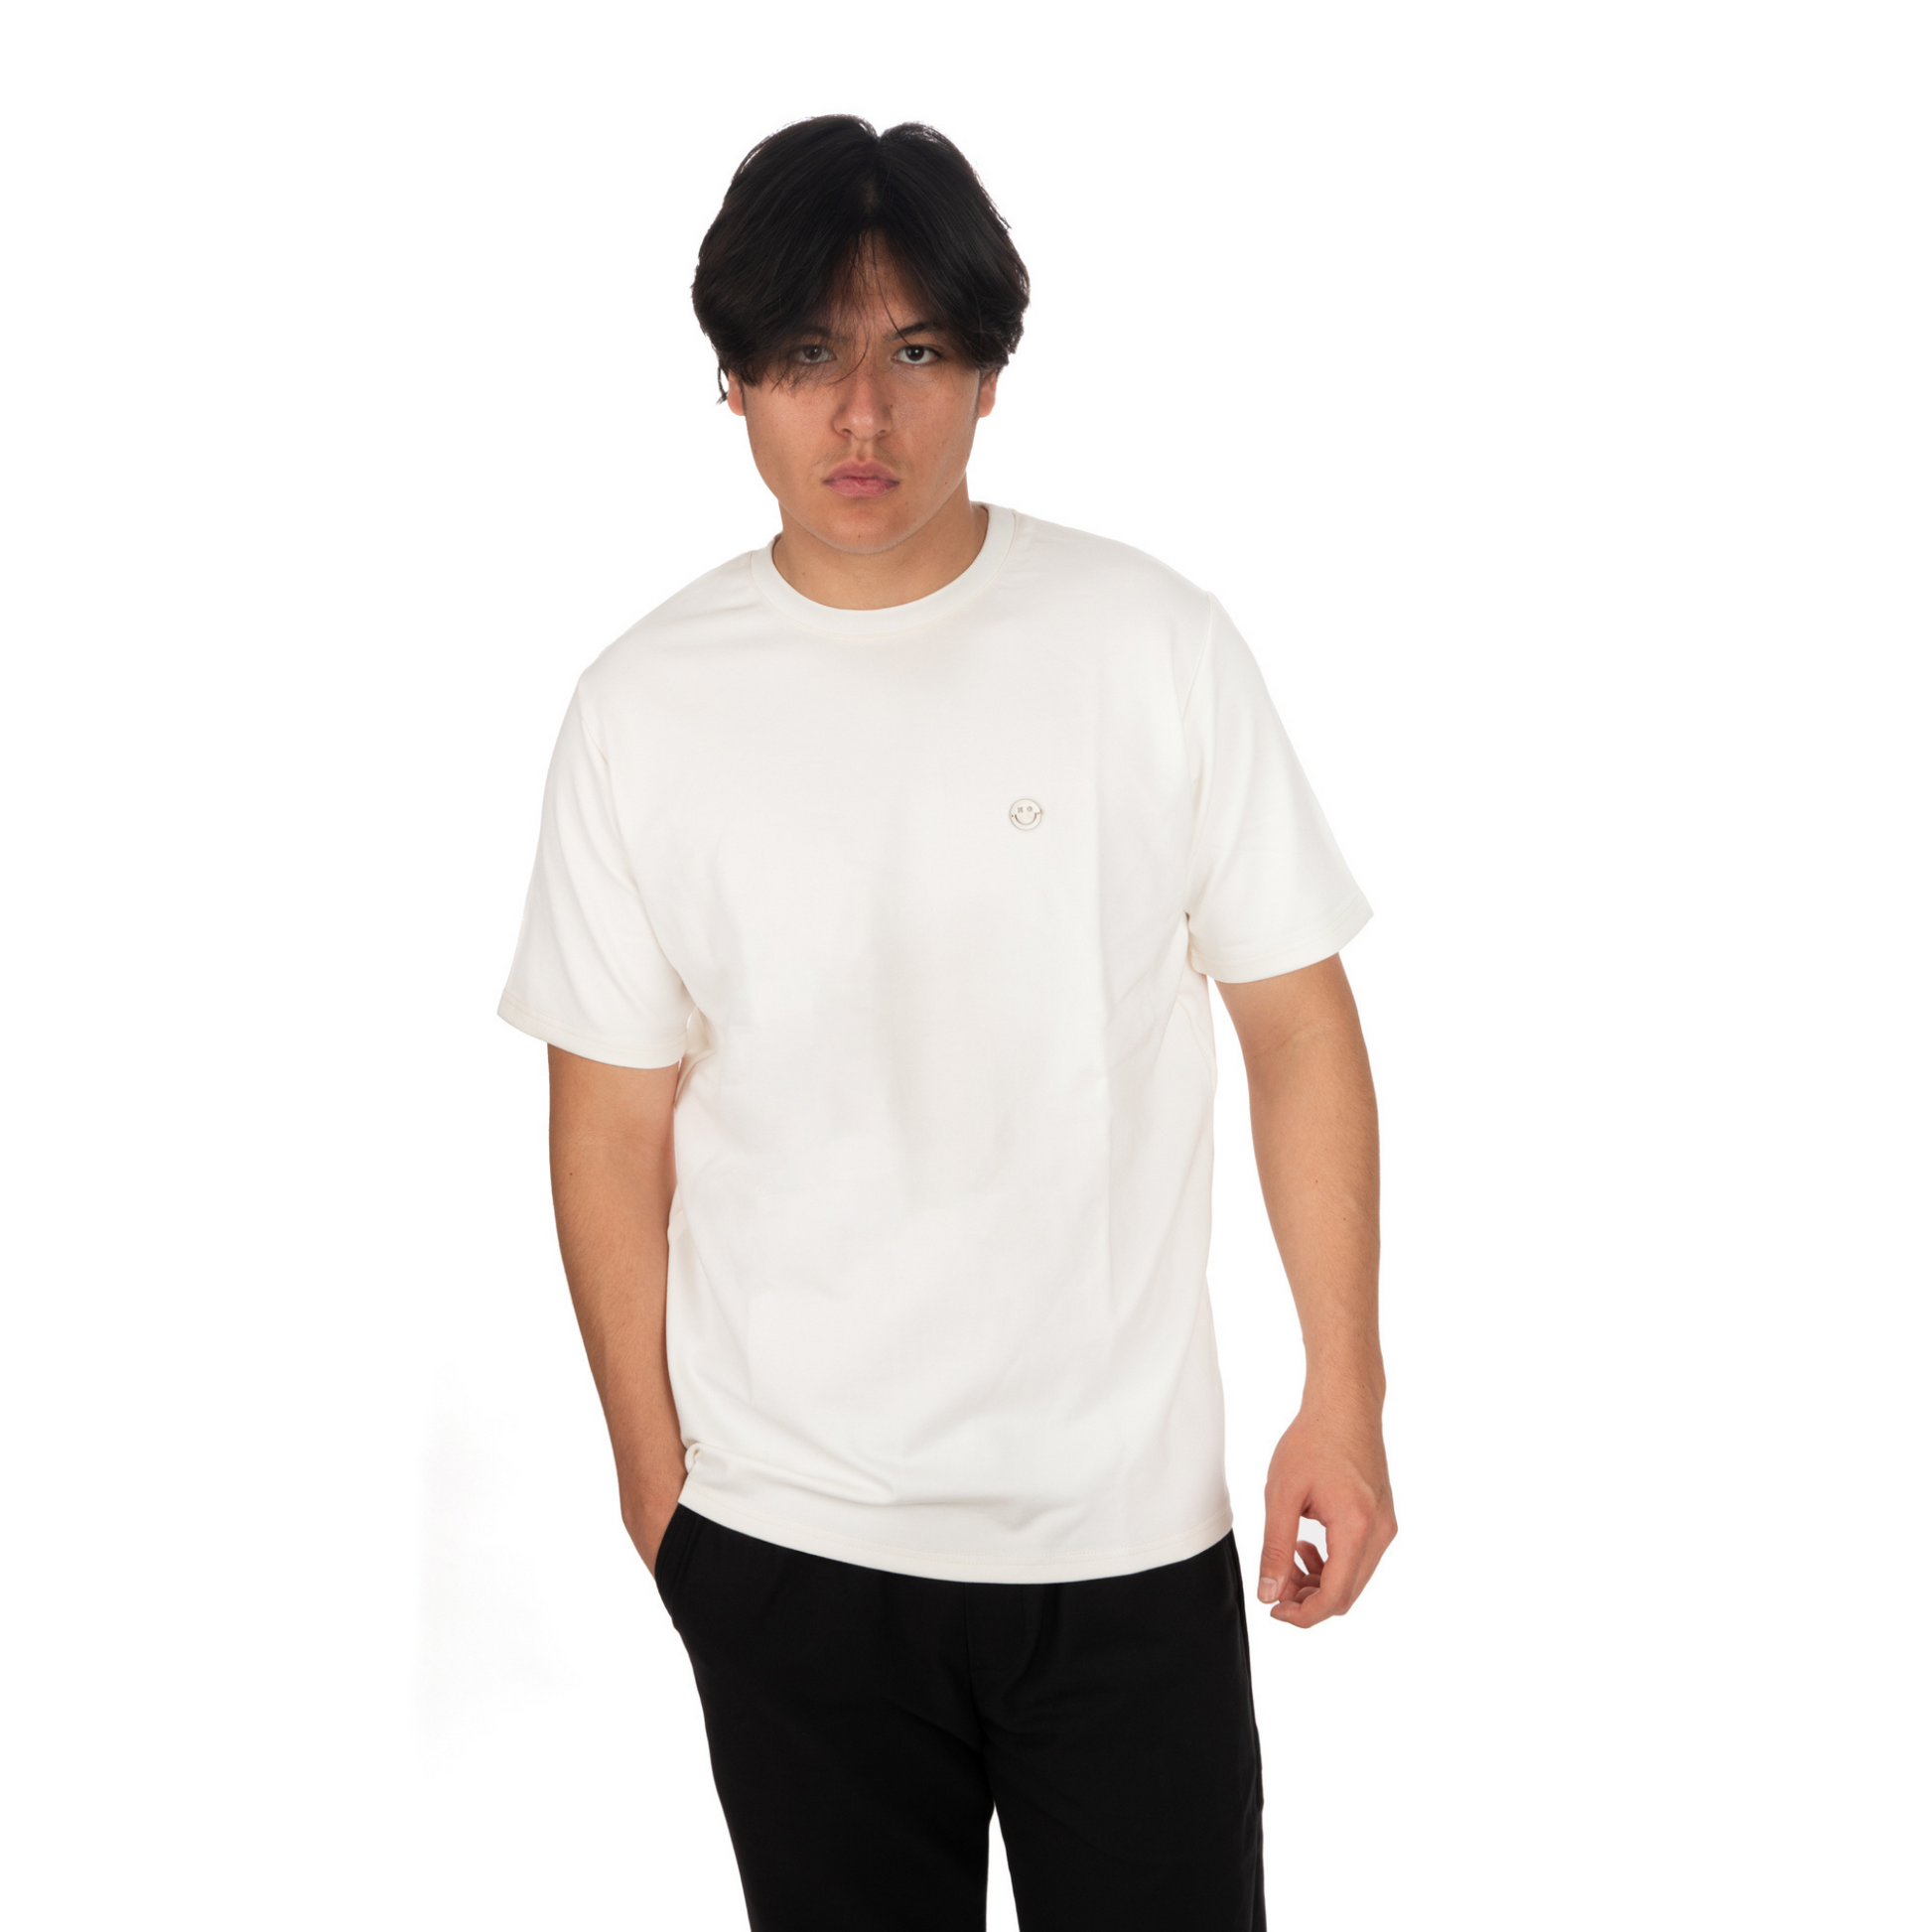 L’Homme Moderne White T-shirt with Stainless Smiley zoomed view on male model